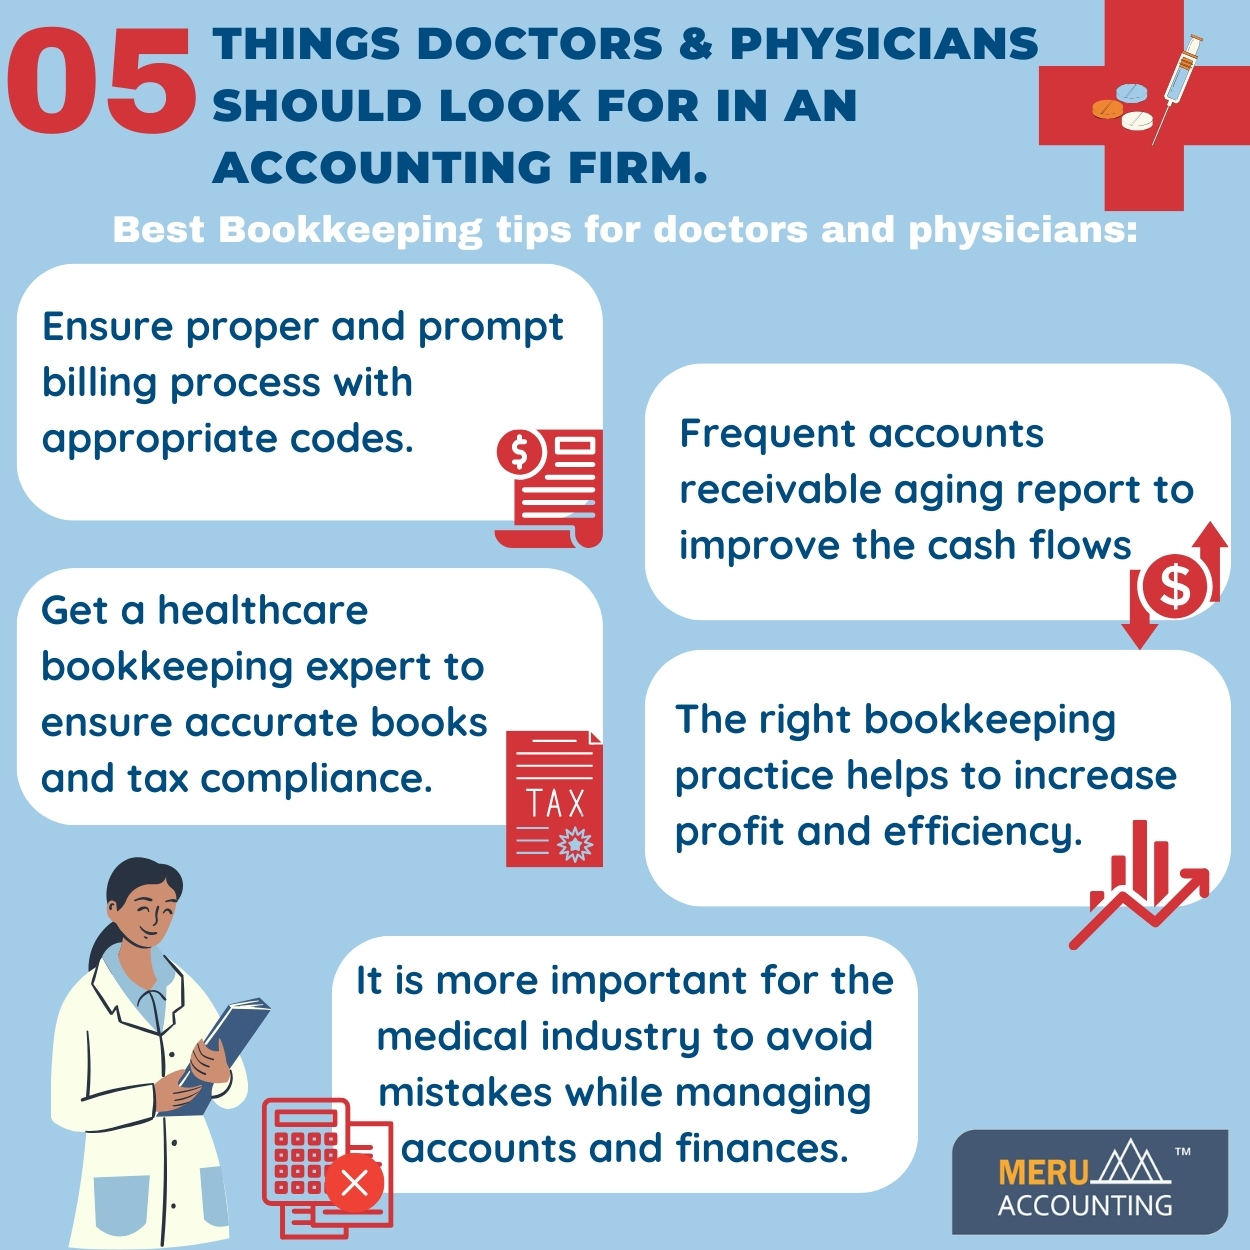 05 Things Doctors Physicians Should Look for in an Accounting Firm. 1250 by 1250